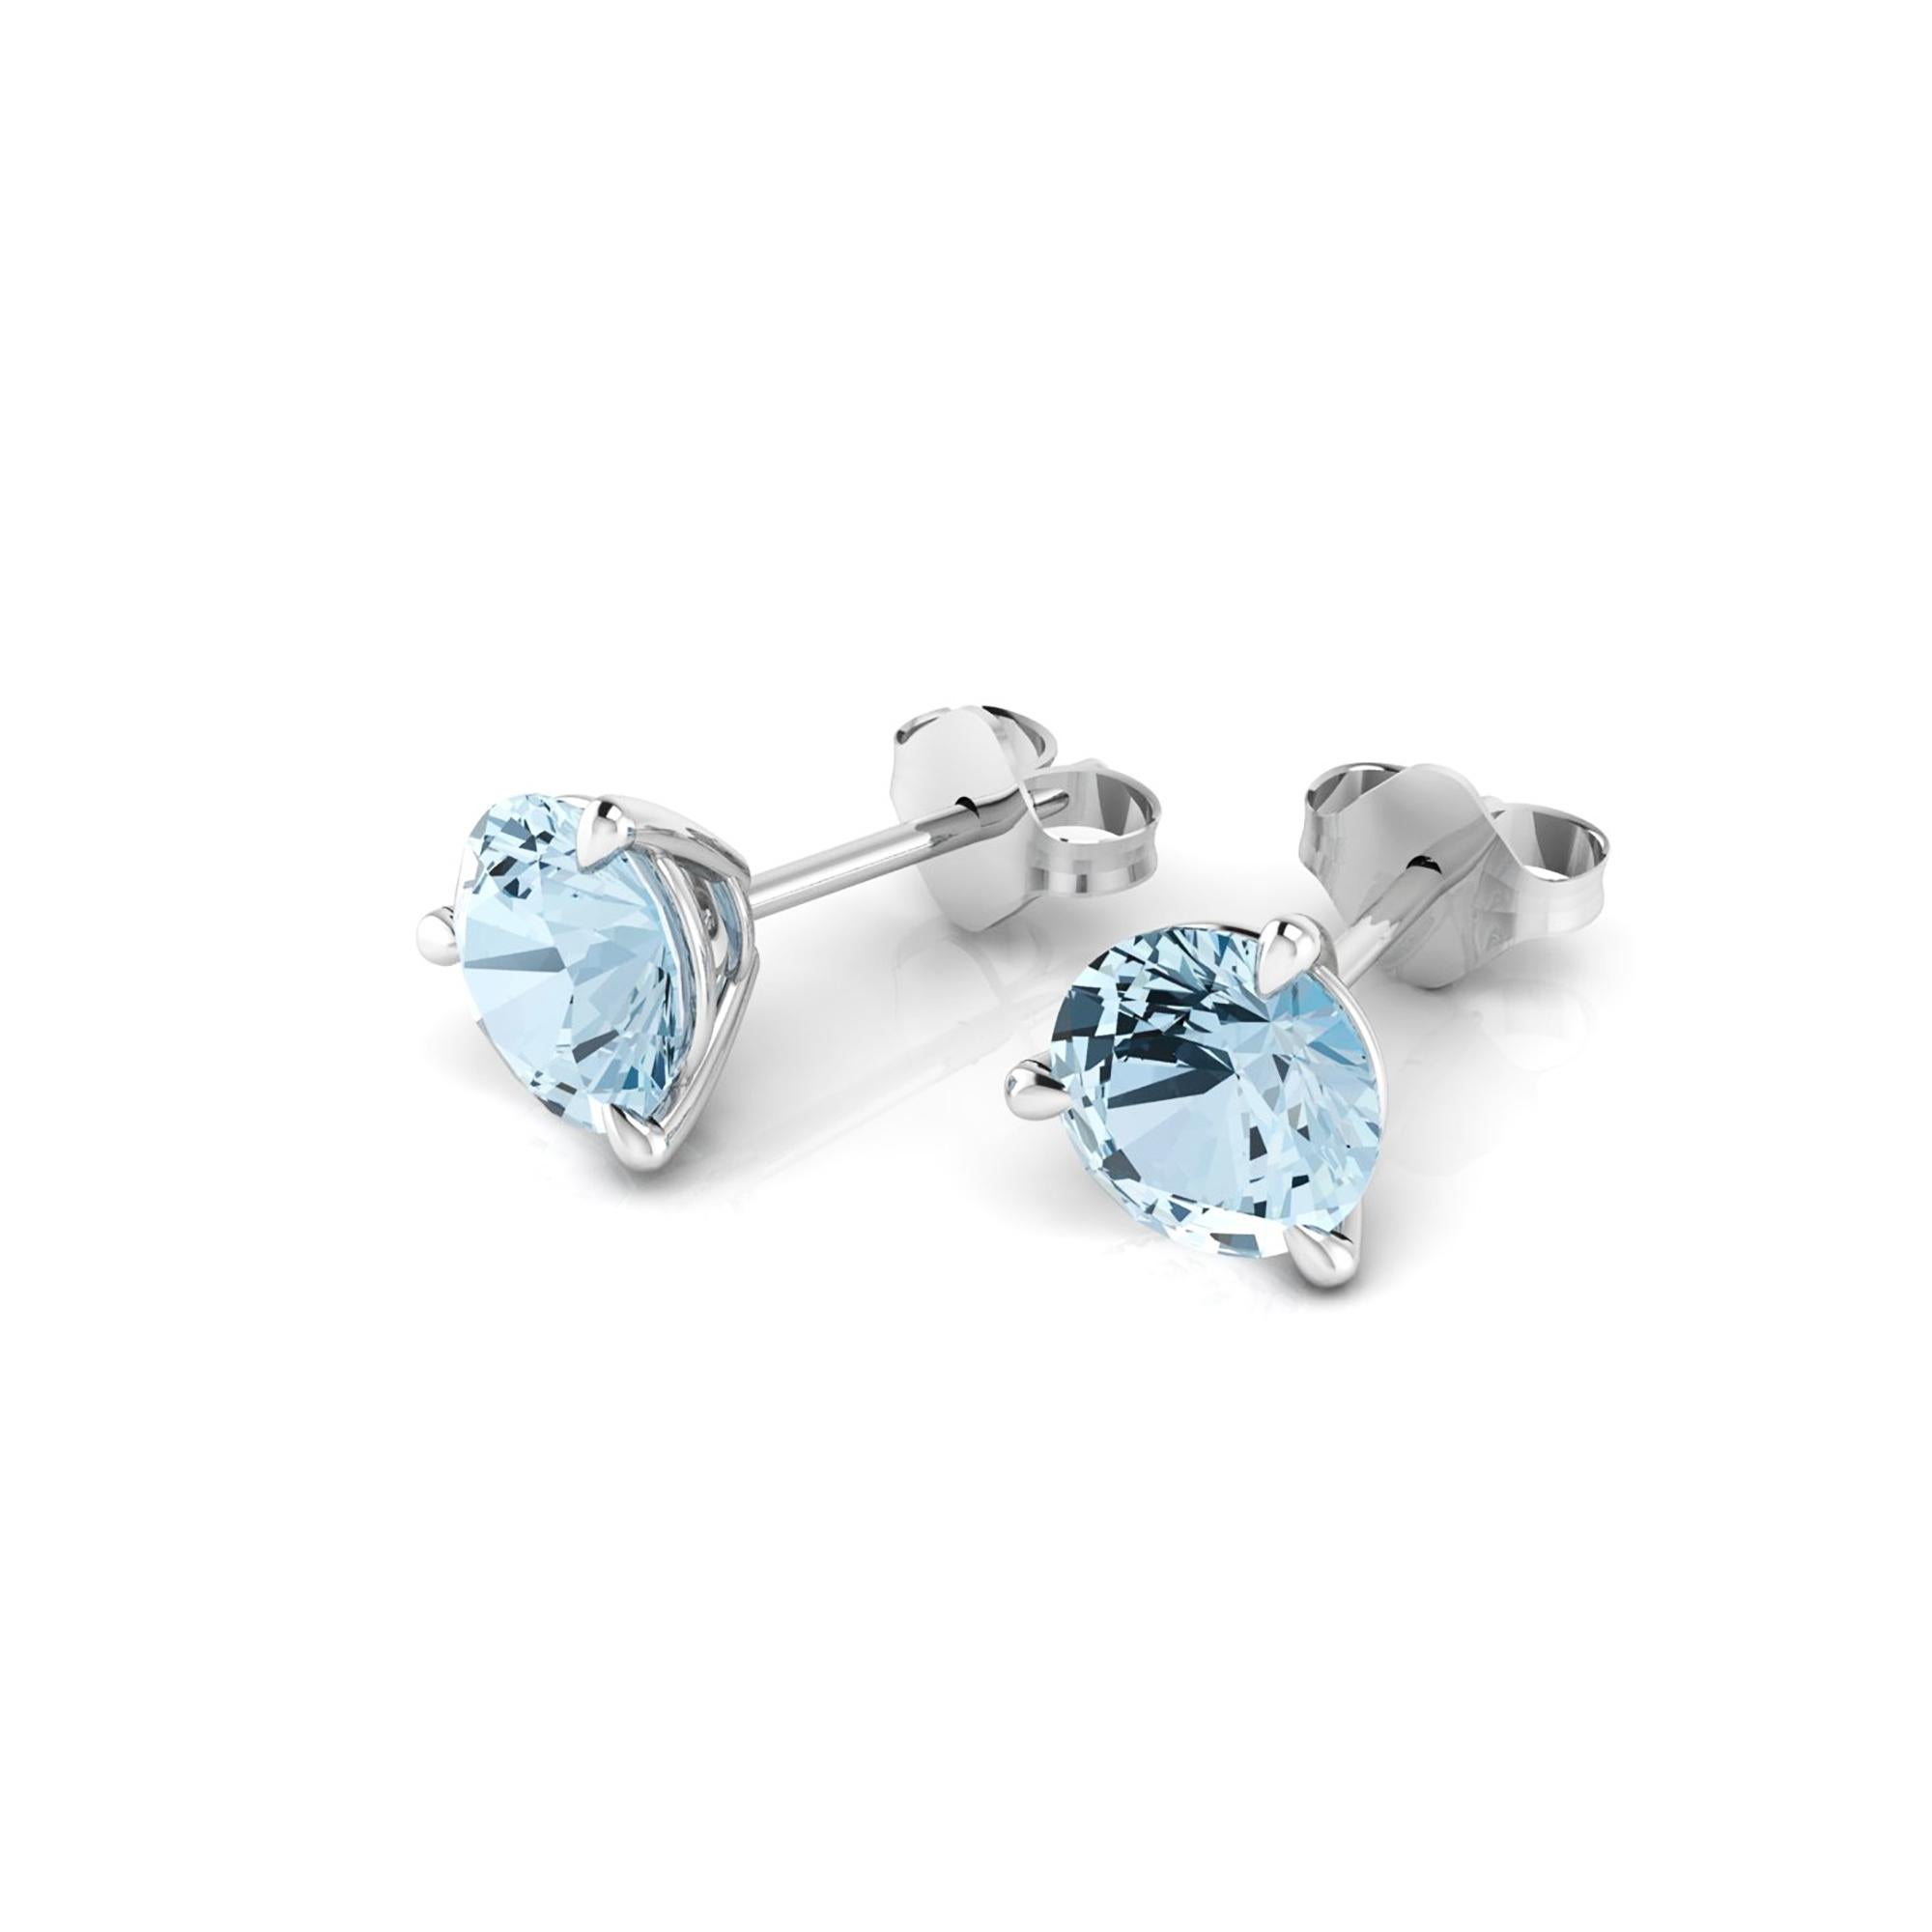 2.30 carat Aquamarine Martini ear-studs, hand made in Platinum 950 in New York City with the best Italian craftsmanship,
Perfect gift for any woman and every age, easy to wear from the office to a special evening out.

Every FERRUCCI jewelry